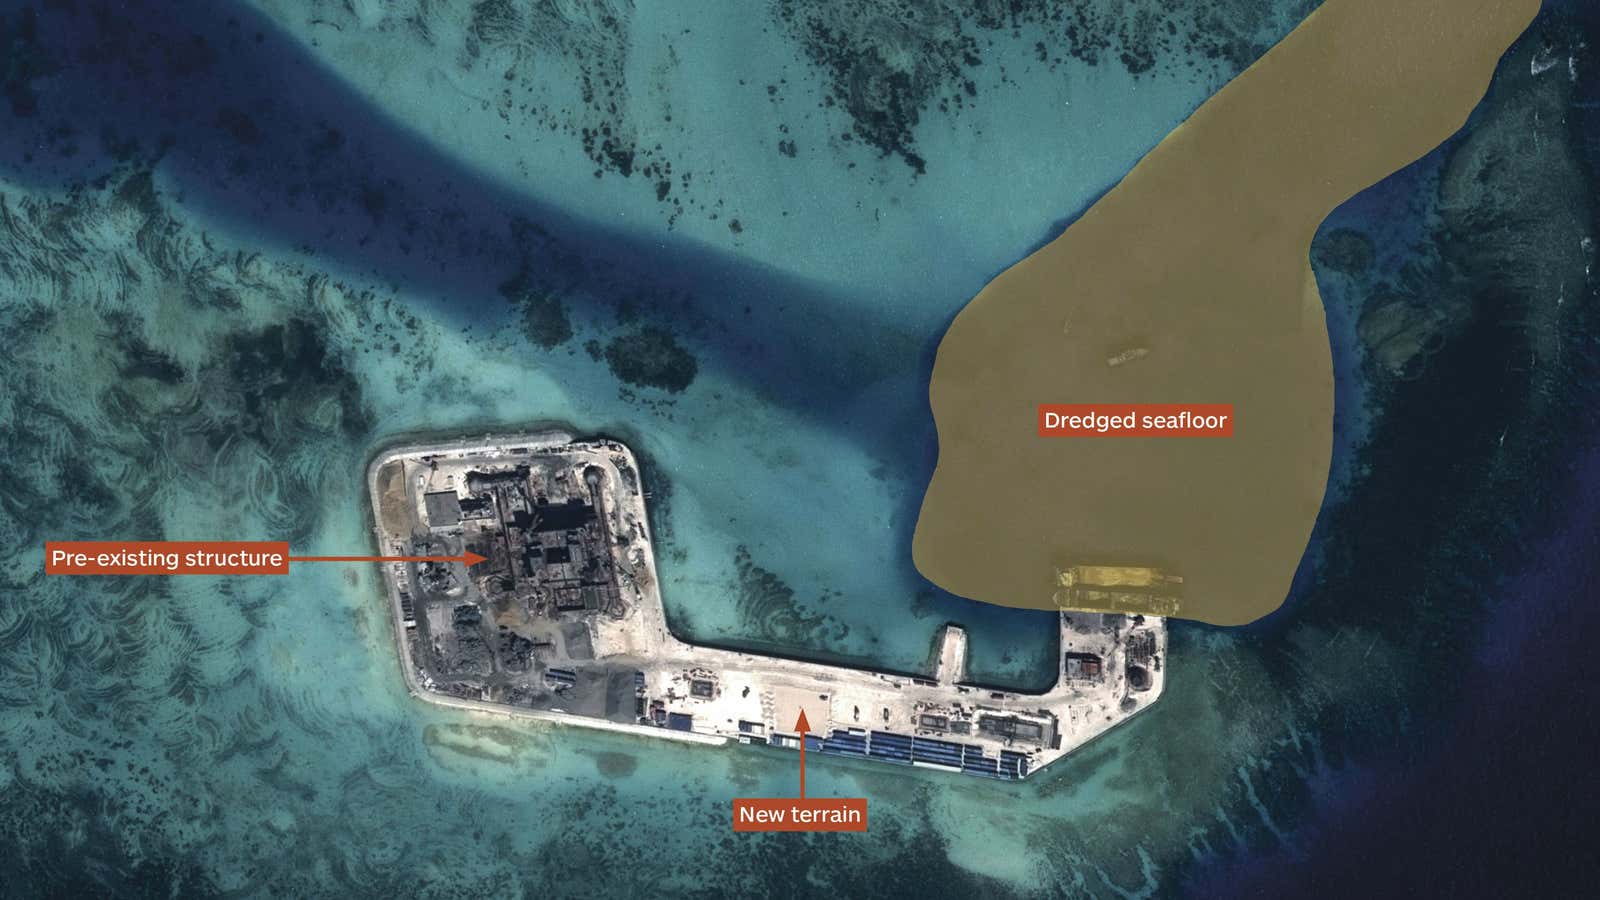 Airbus Defence and Space imagery shows the result of Chinese land reclamation at Hughes Reef in the South China Sea’s Union Banks.